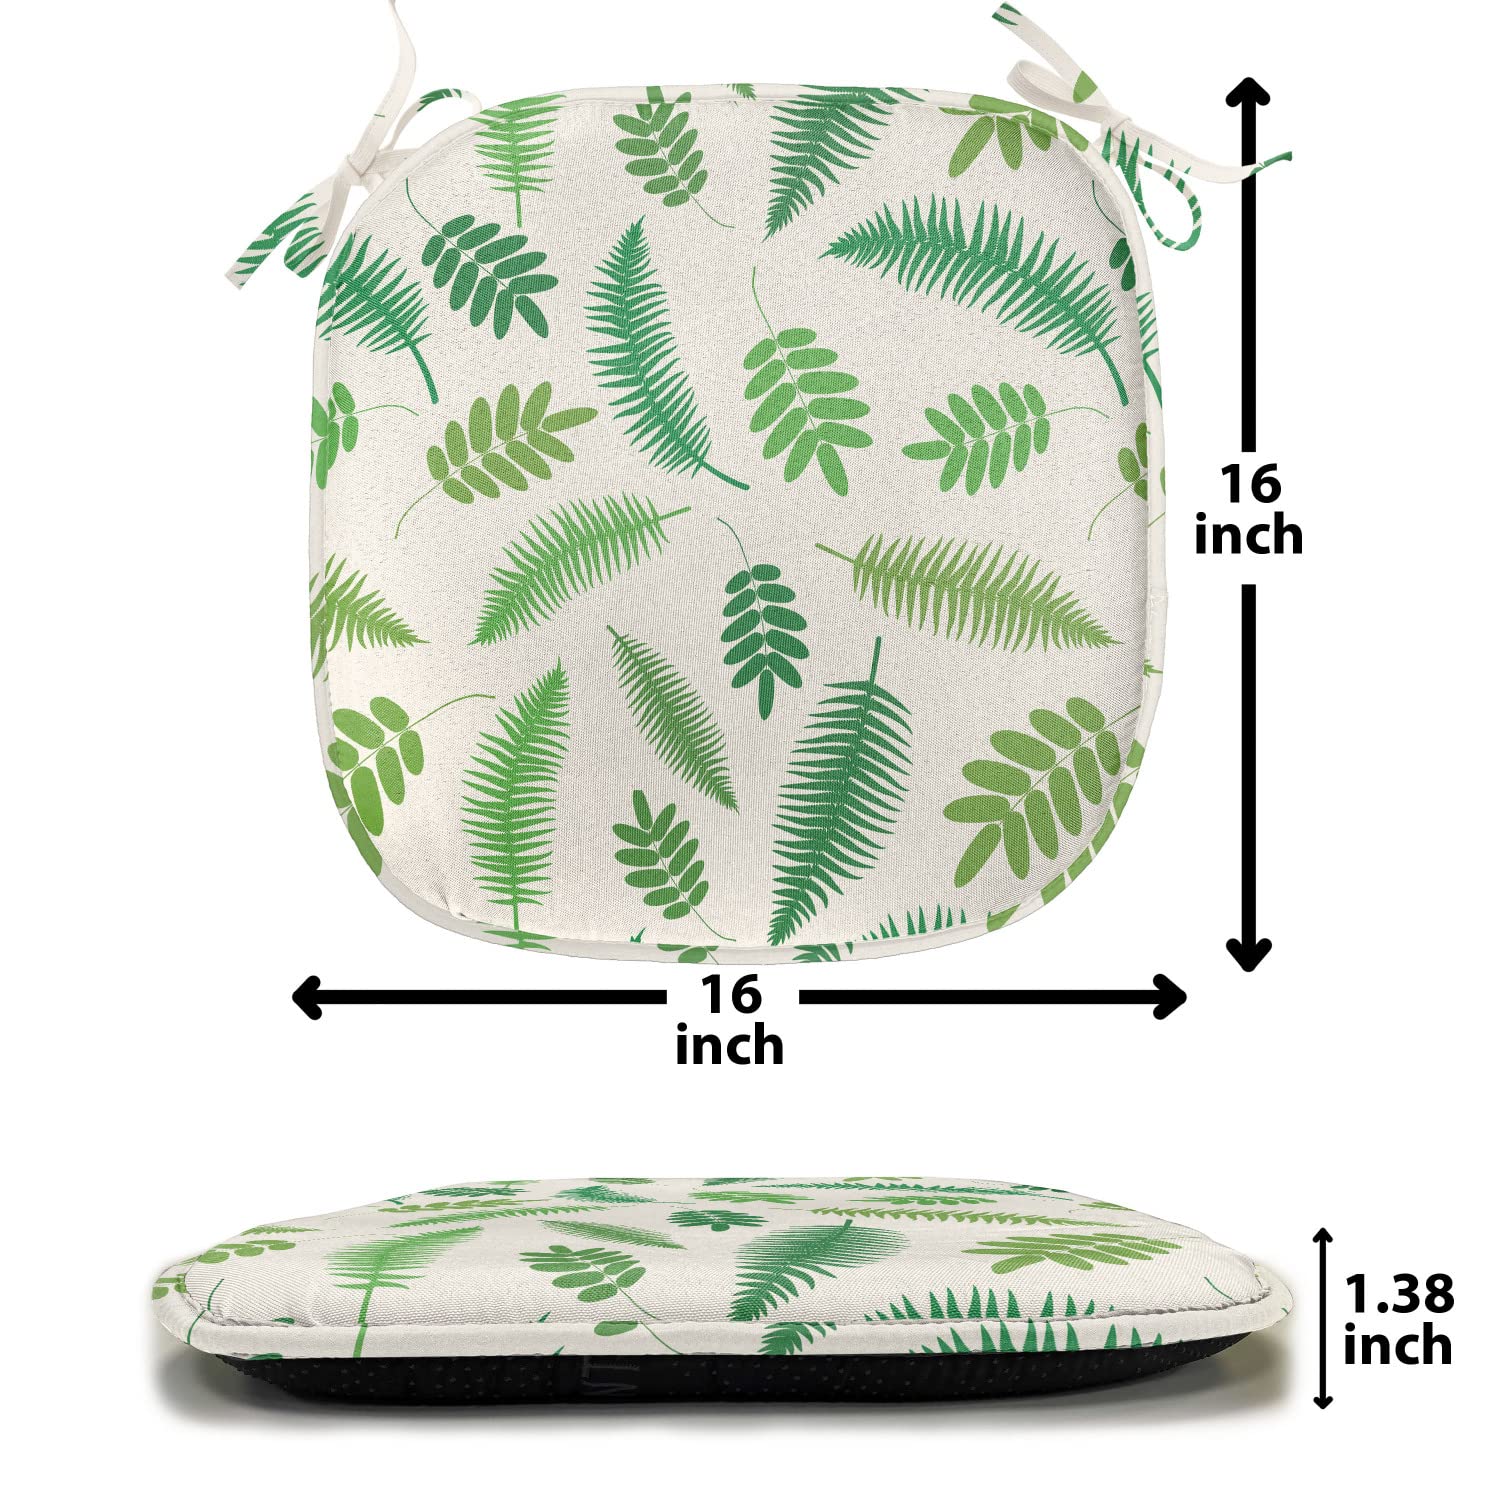 Lunarable Fern Pattern Chair Seating Cushion Set of 4, Nature Botanical Design Art Image Various Style Fronds Illustration, Anti-Slip Seat Padding for Kitchen & Patio, 16"x16", Ivory and Lime Green